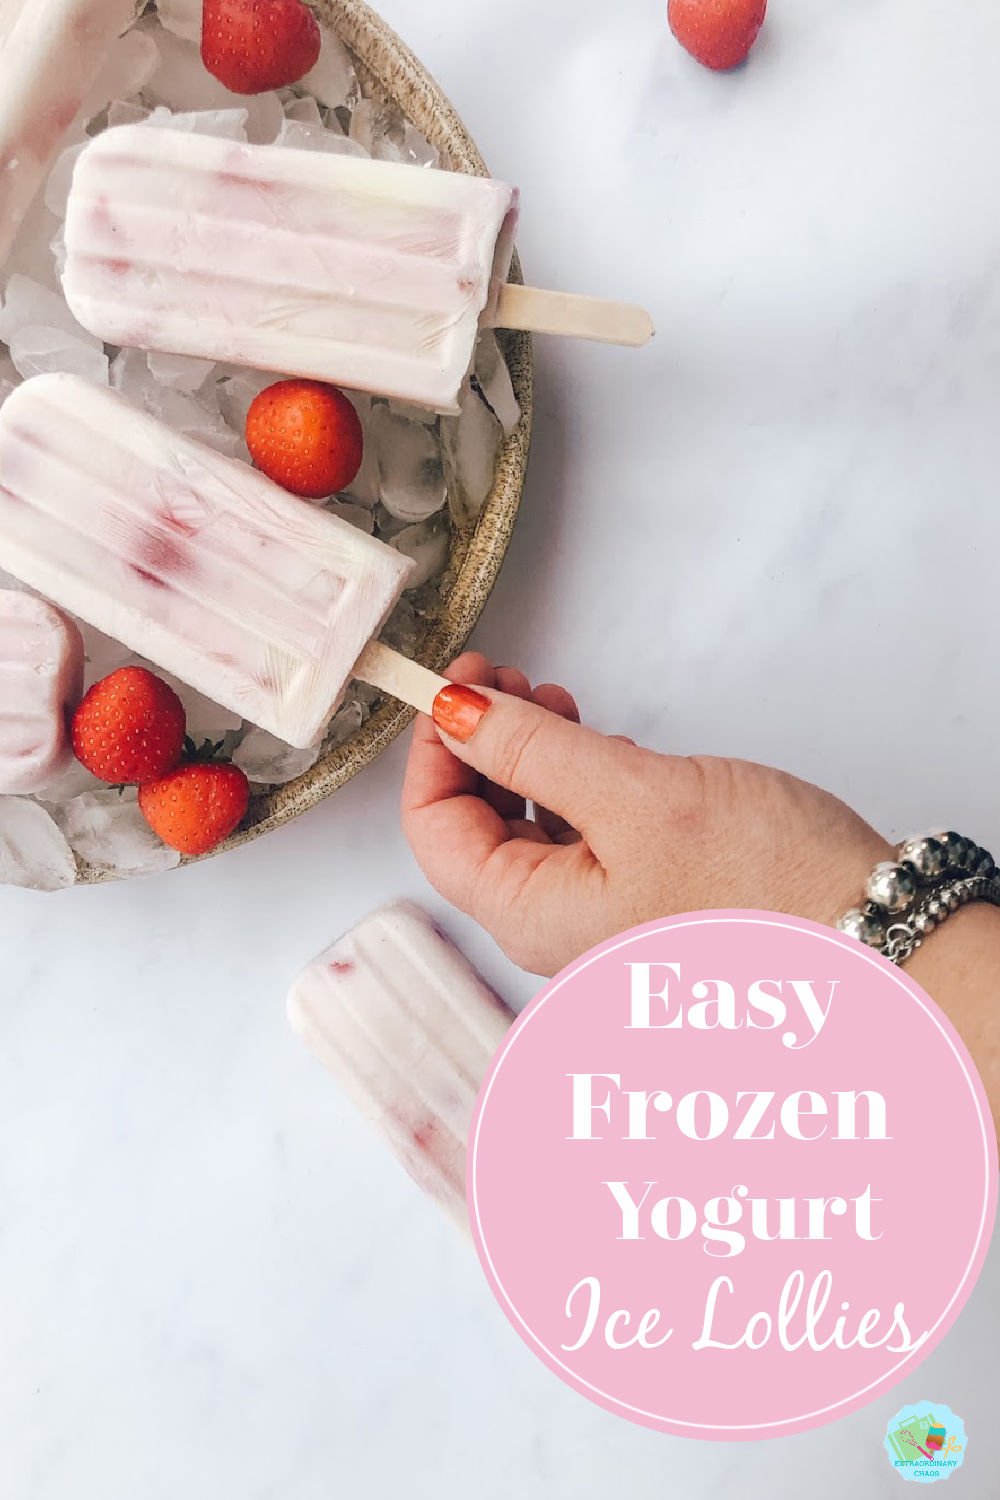 How to make Frozen Yoghurt Ice lollies with fat free yoghurt and fruit for a low fat snack